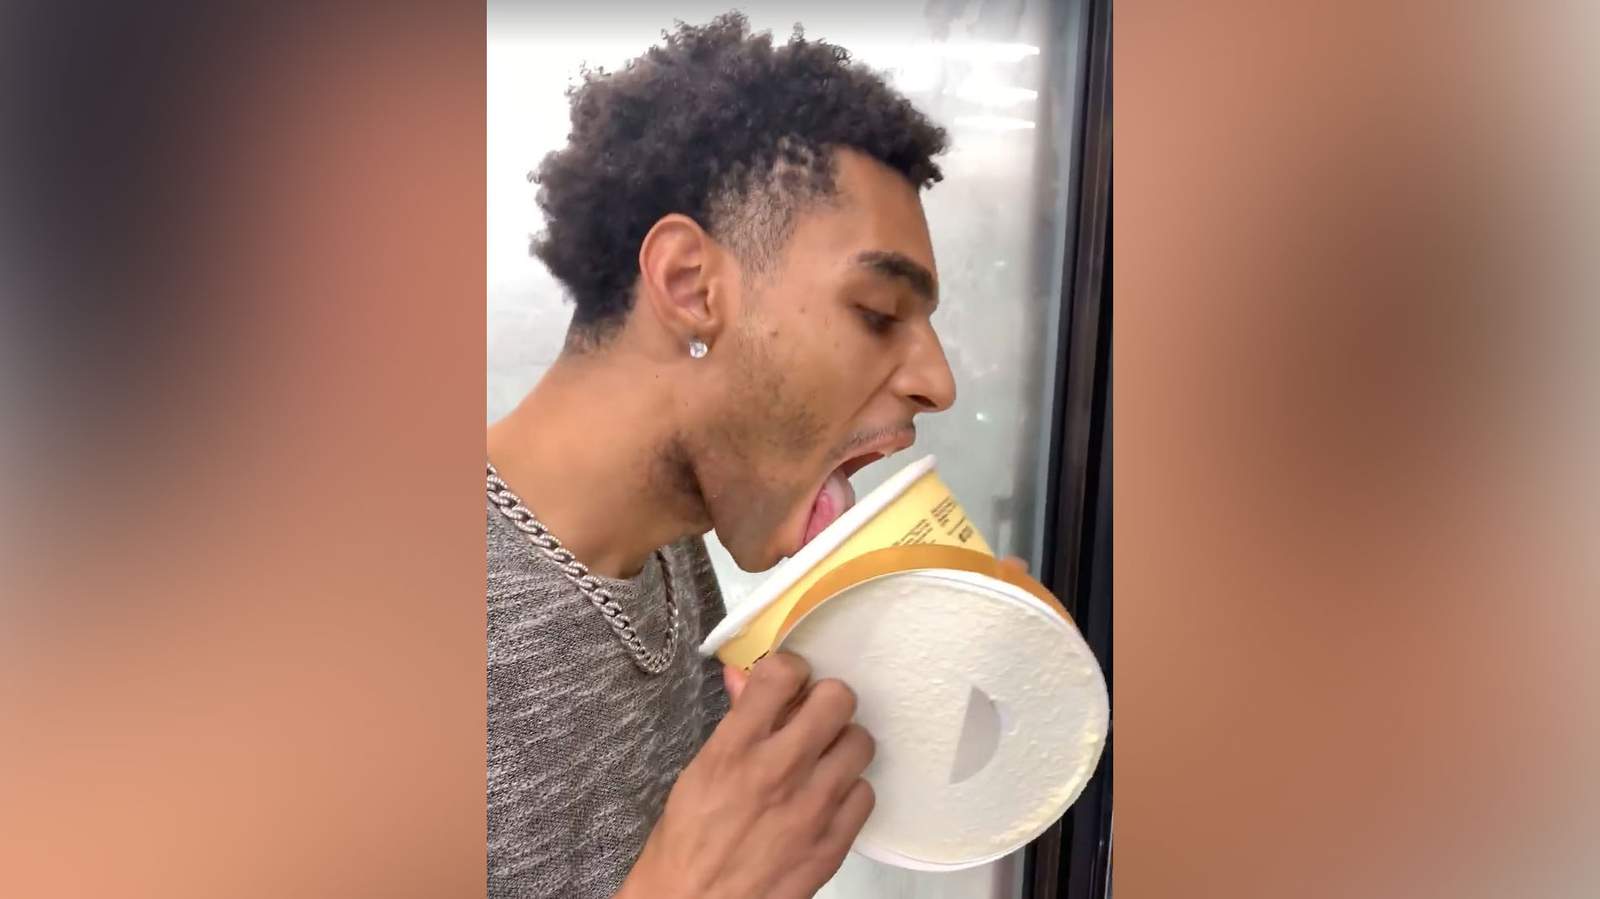 Texas man gets jail for video of himself licking ice cream tub